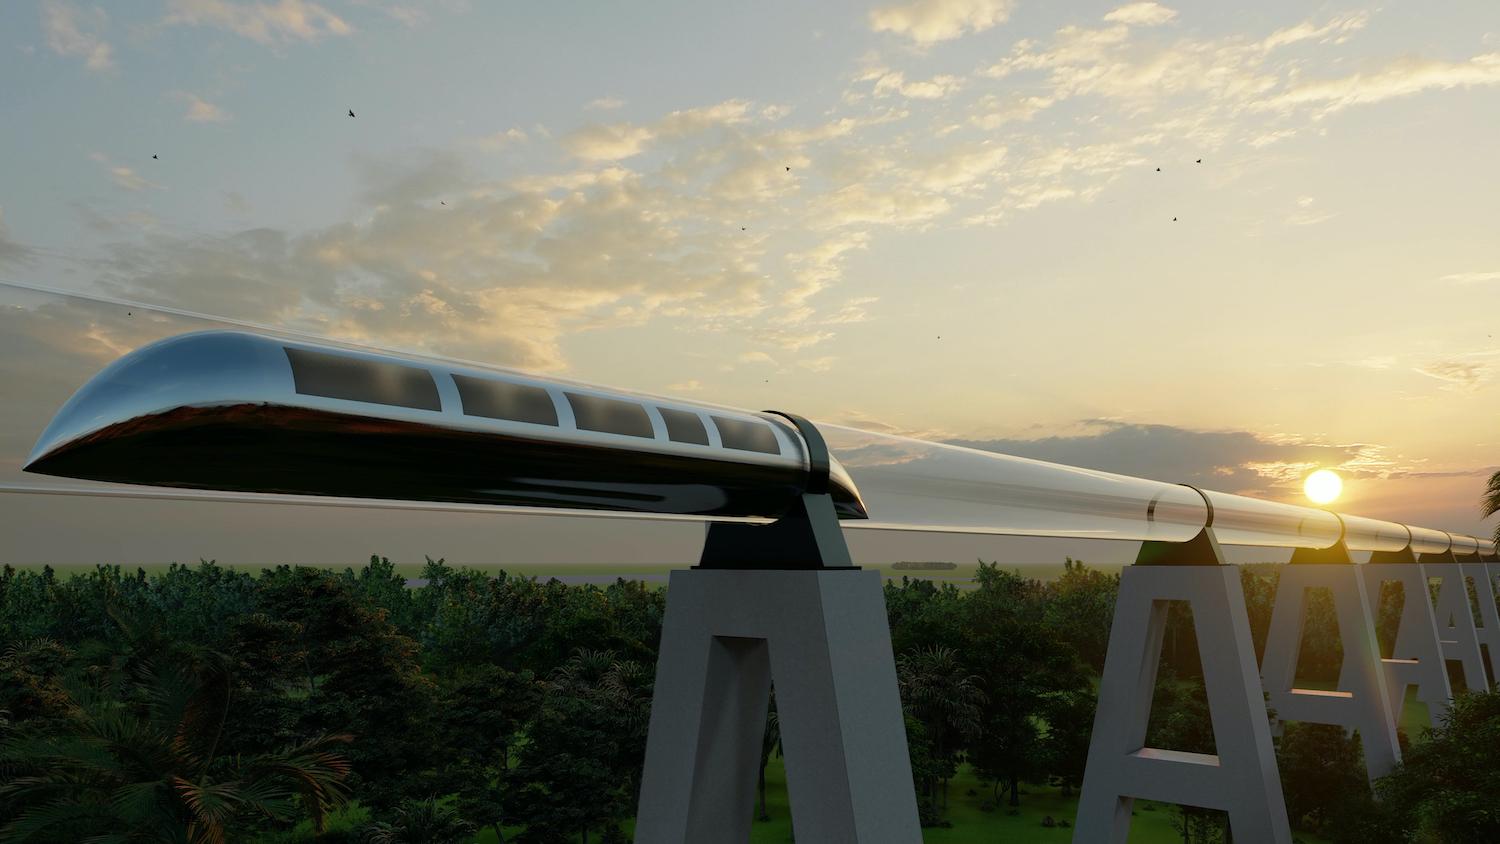 More than people, hyperloops can transport shipping containers and reduce  CO2